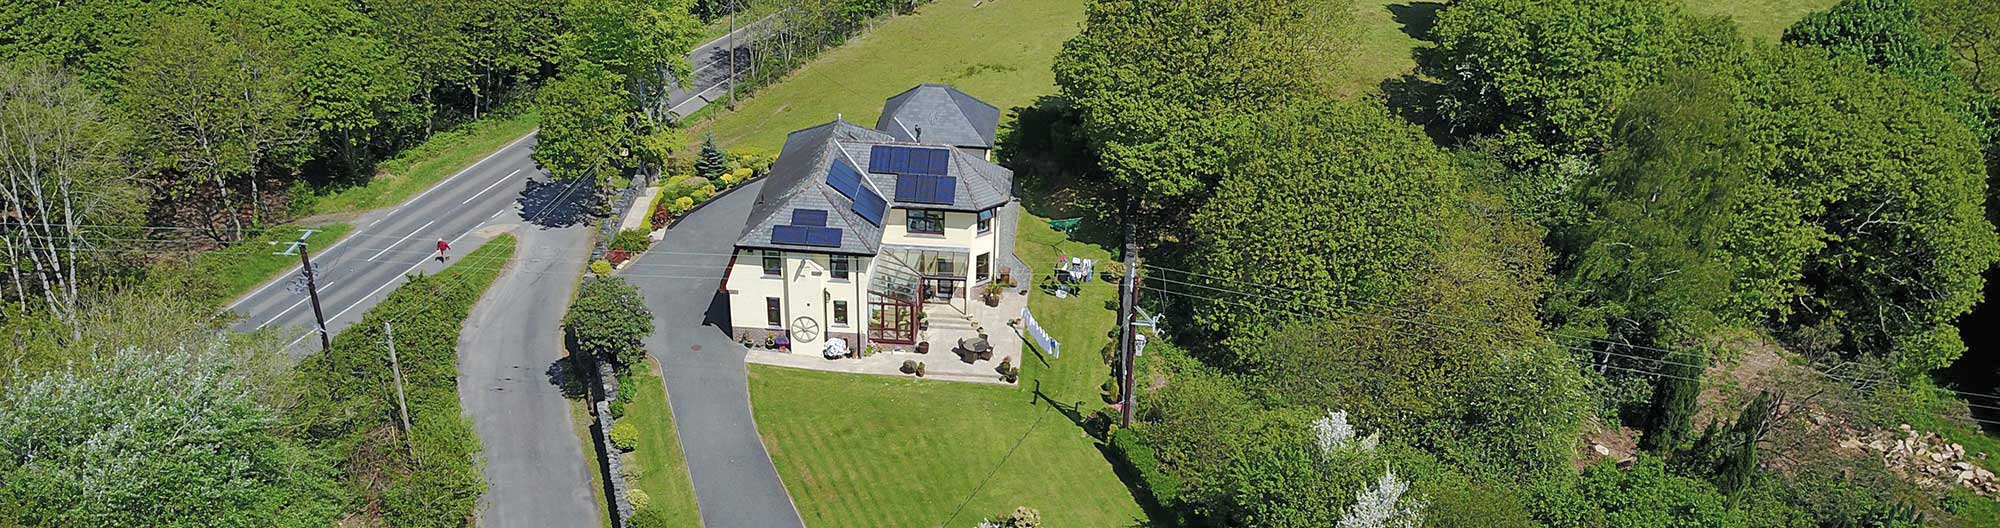 Penaber Bed & Breakfast from the Air